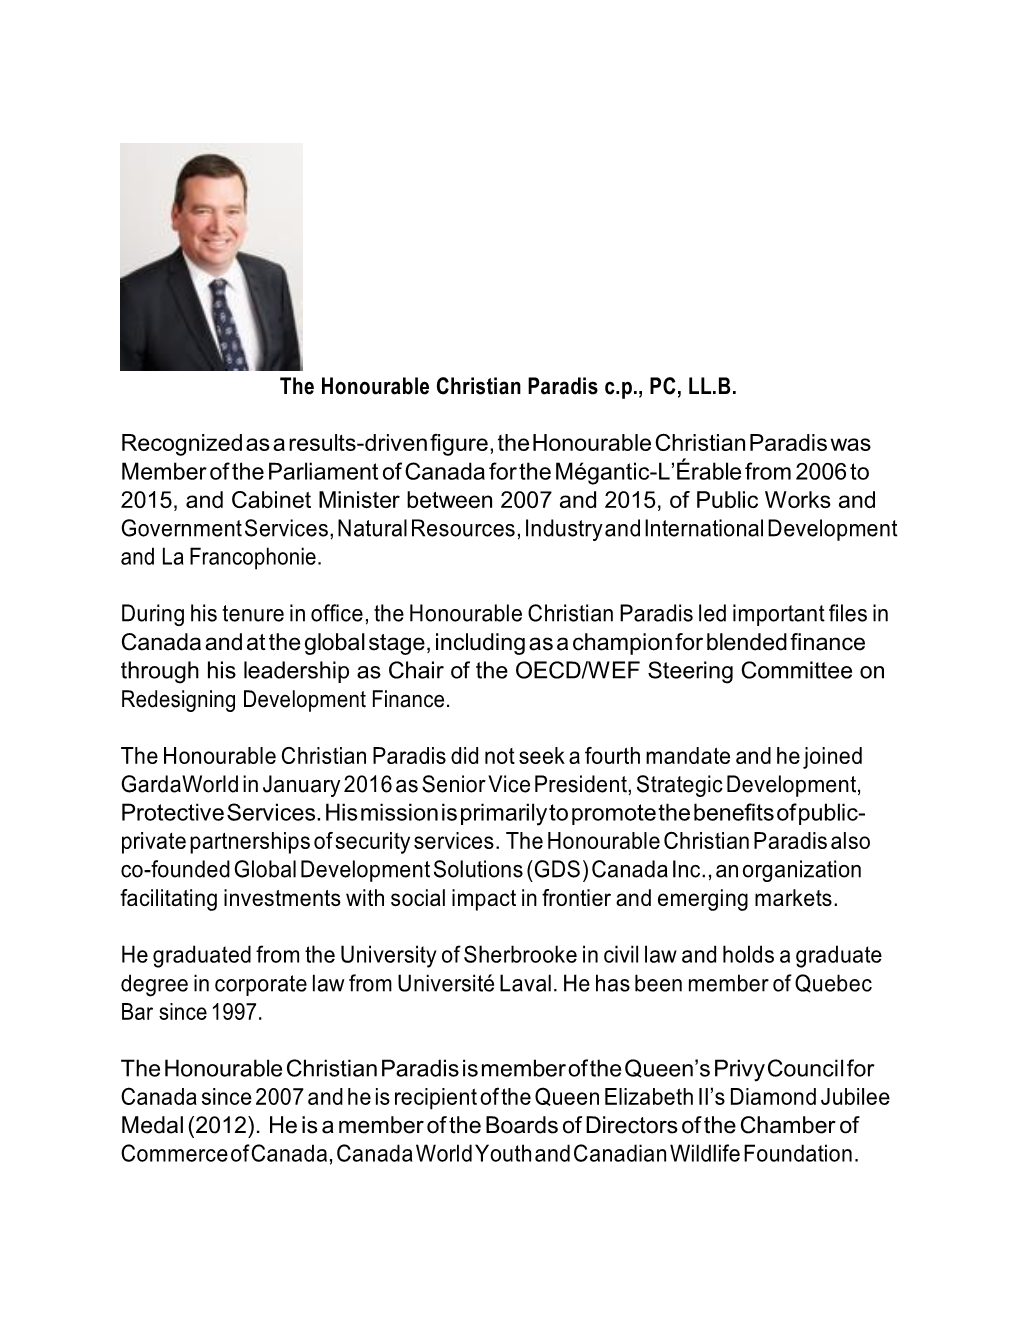 The Honourable Christian Paradis C.P., PC, LL.B. Recognized As a Results